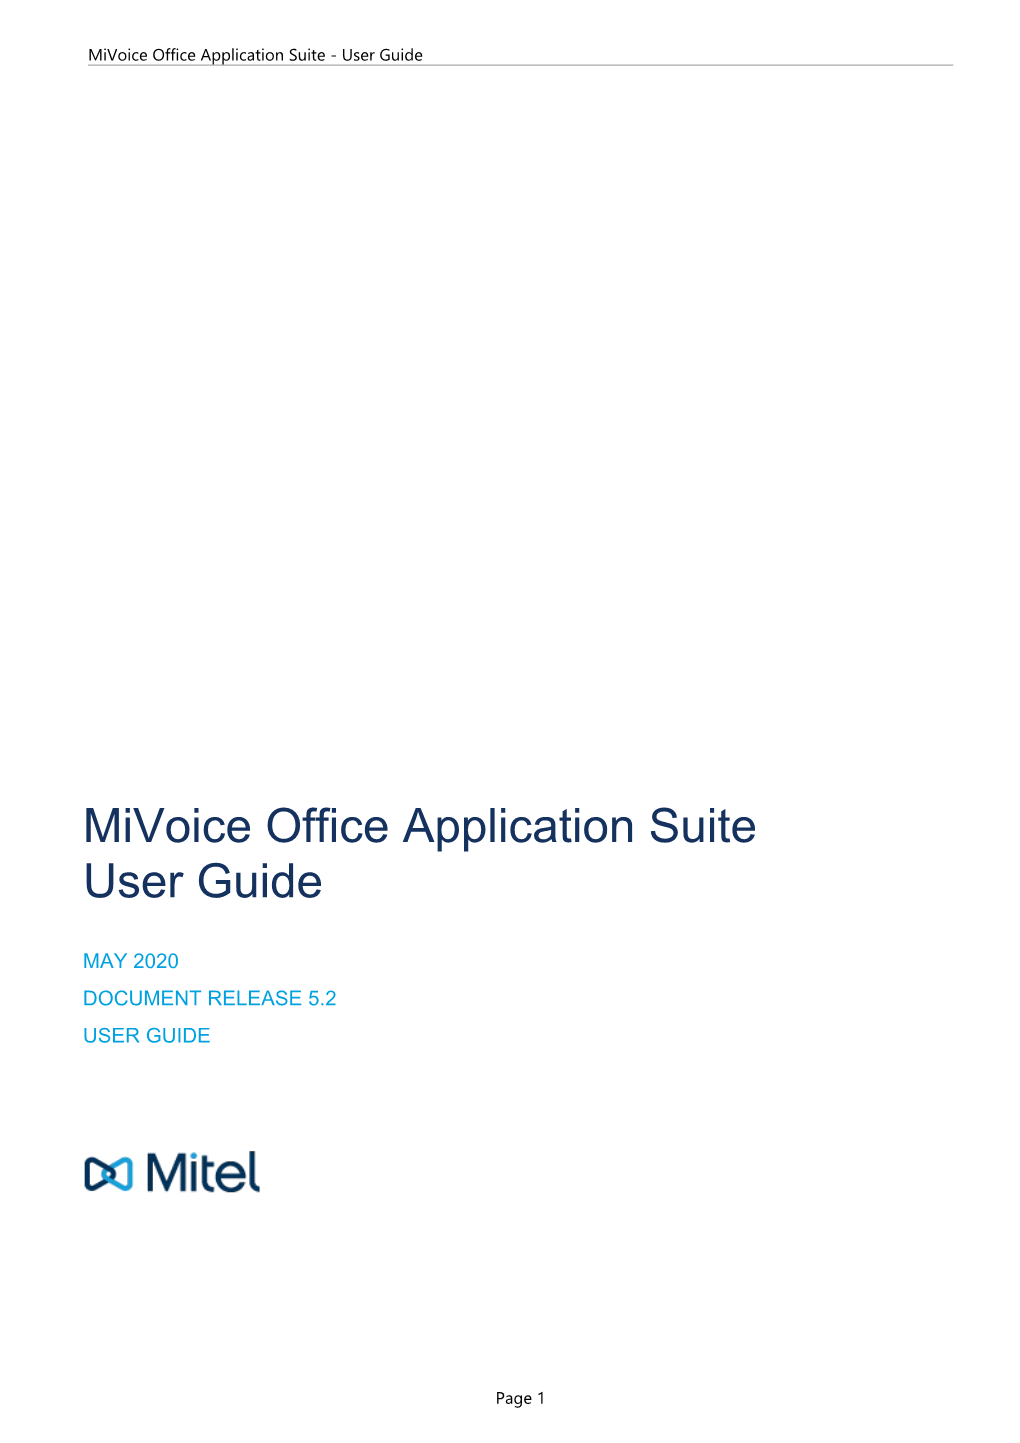 Mitel Mivoice Office Application Suite User Guide